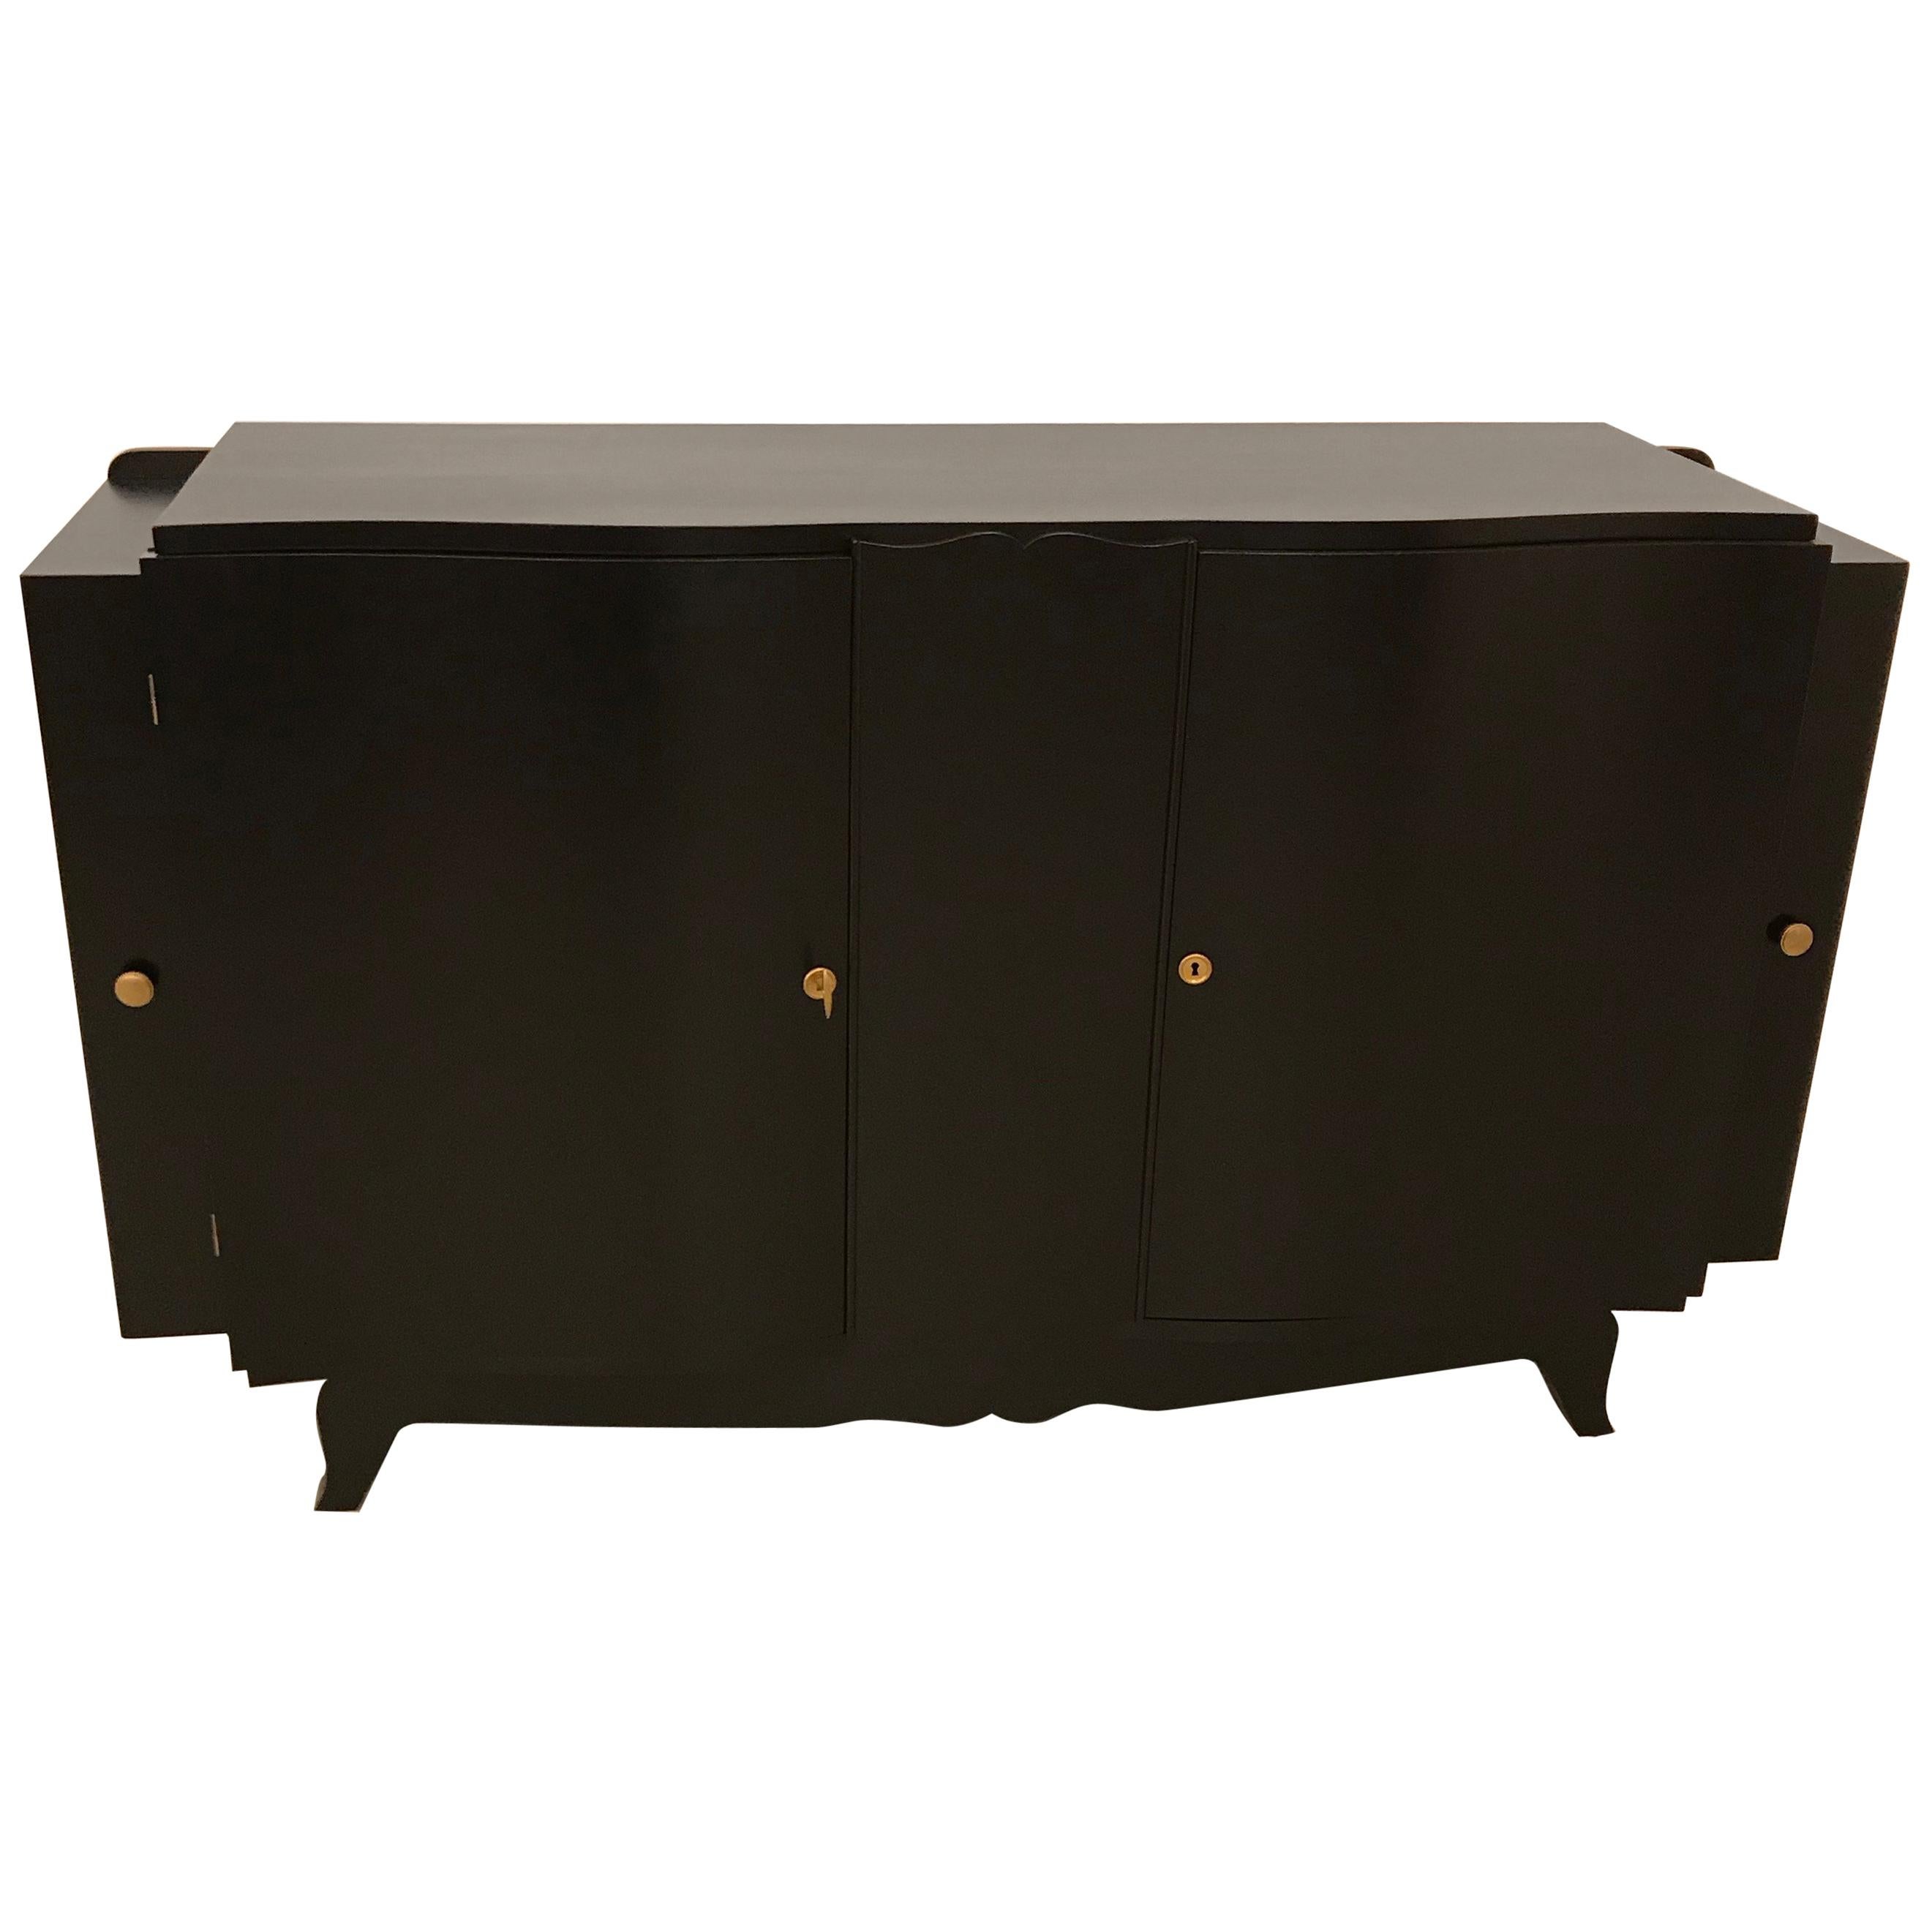 French Art Deco Black Lacquered Sideboard or Buffet with Dry Bar